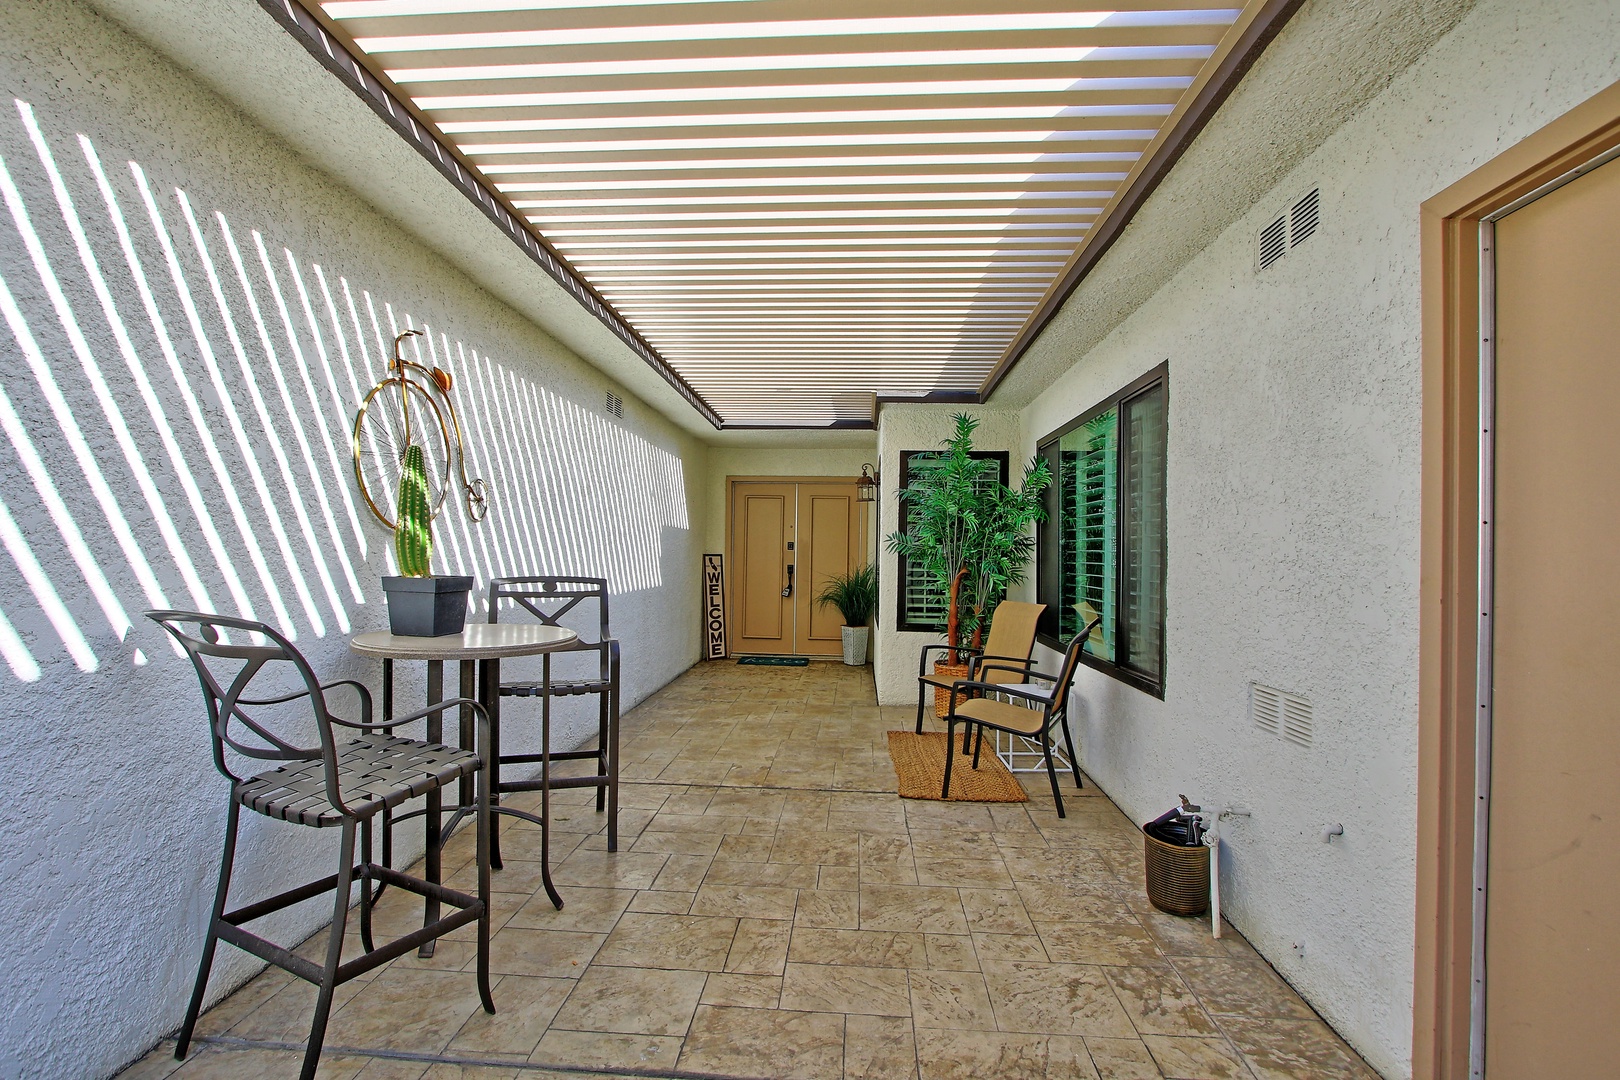 Entry Courtyard